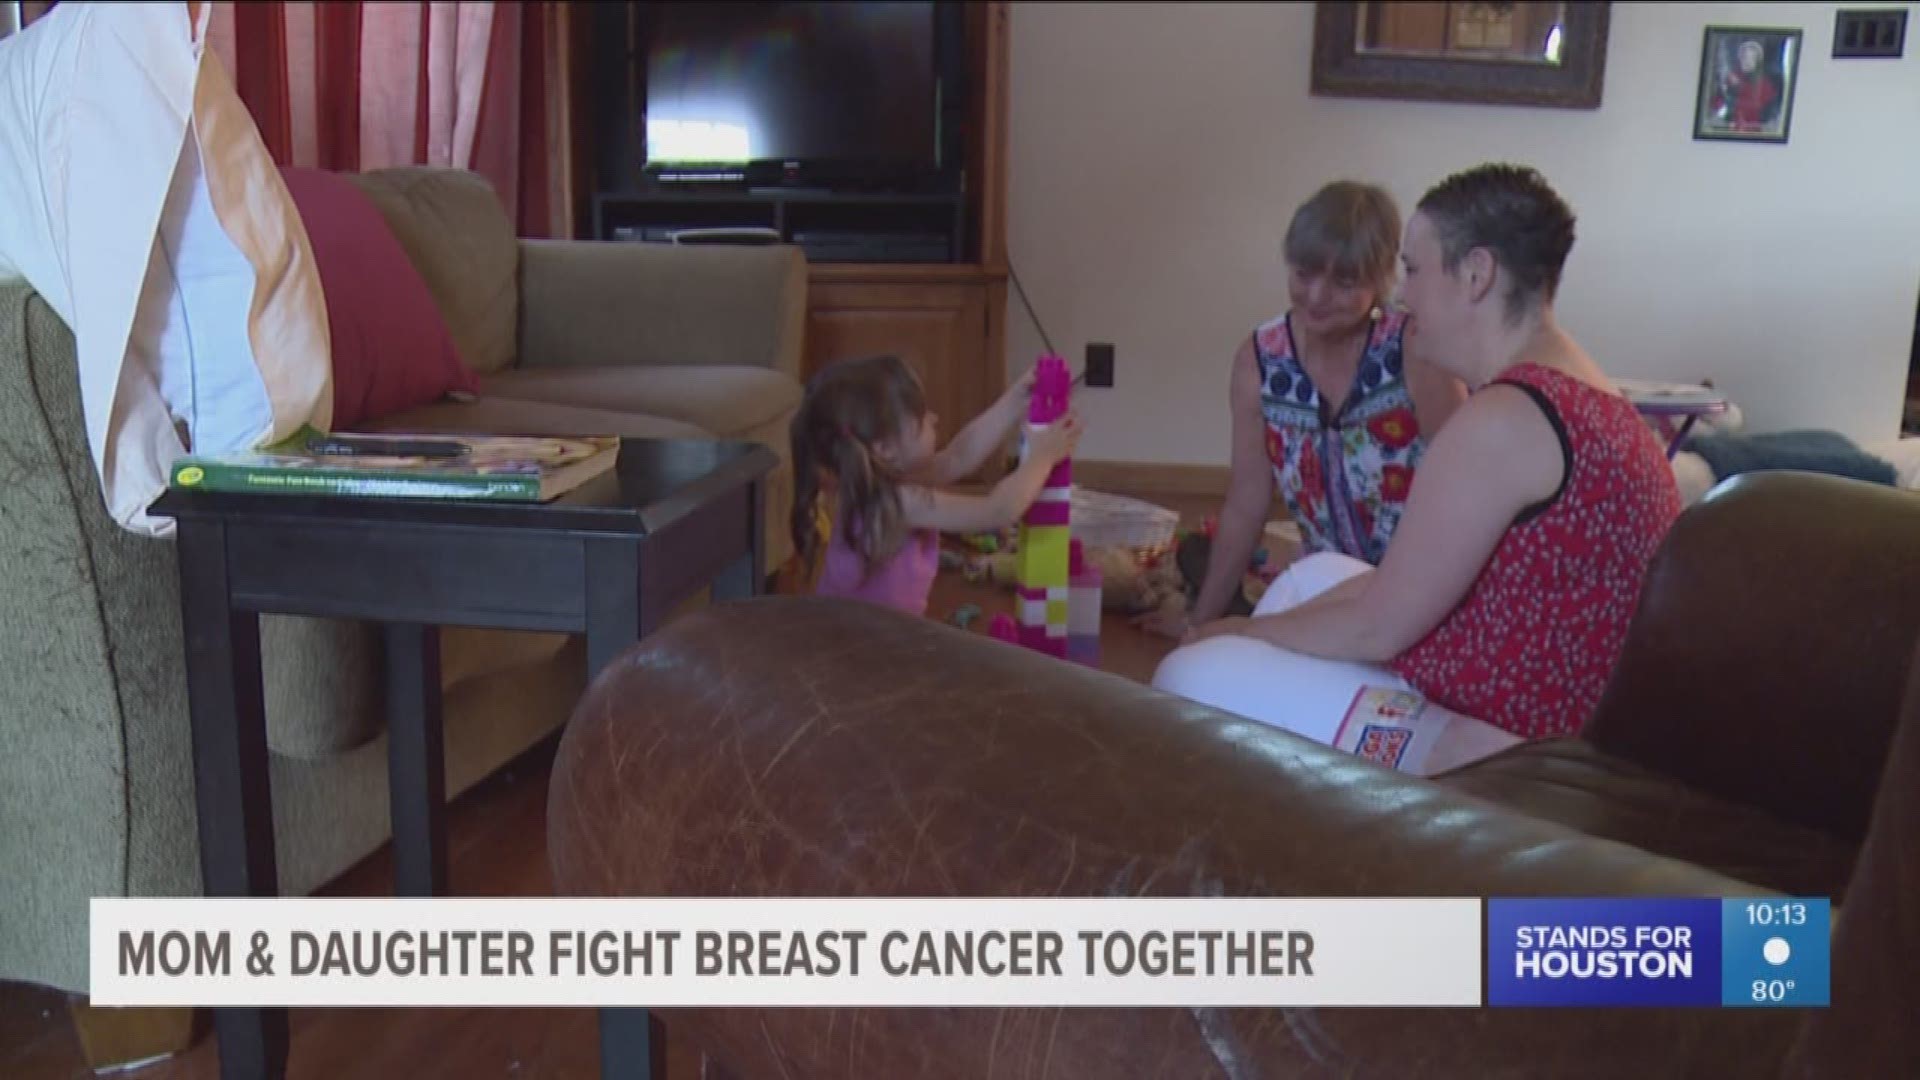 A Houston family with a history of breast cancer received devastating news - both mom and daughter have it. But only through that struggle do they find out just how strong they truly are.